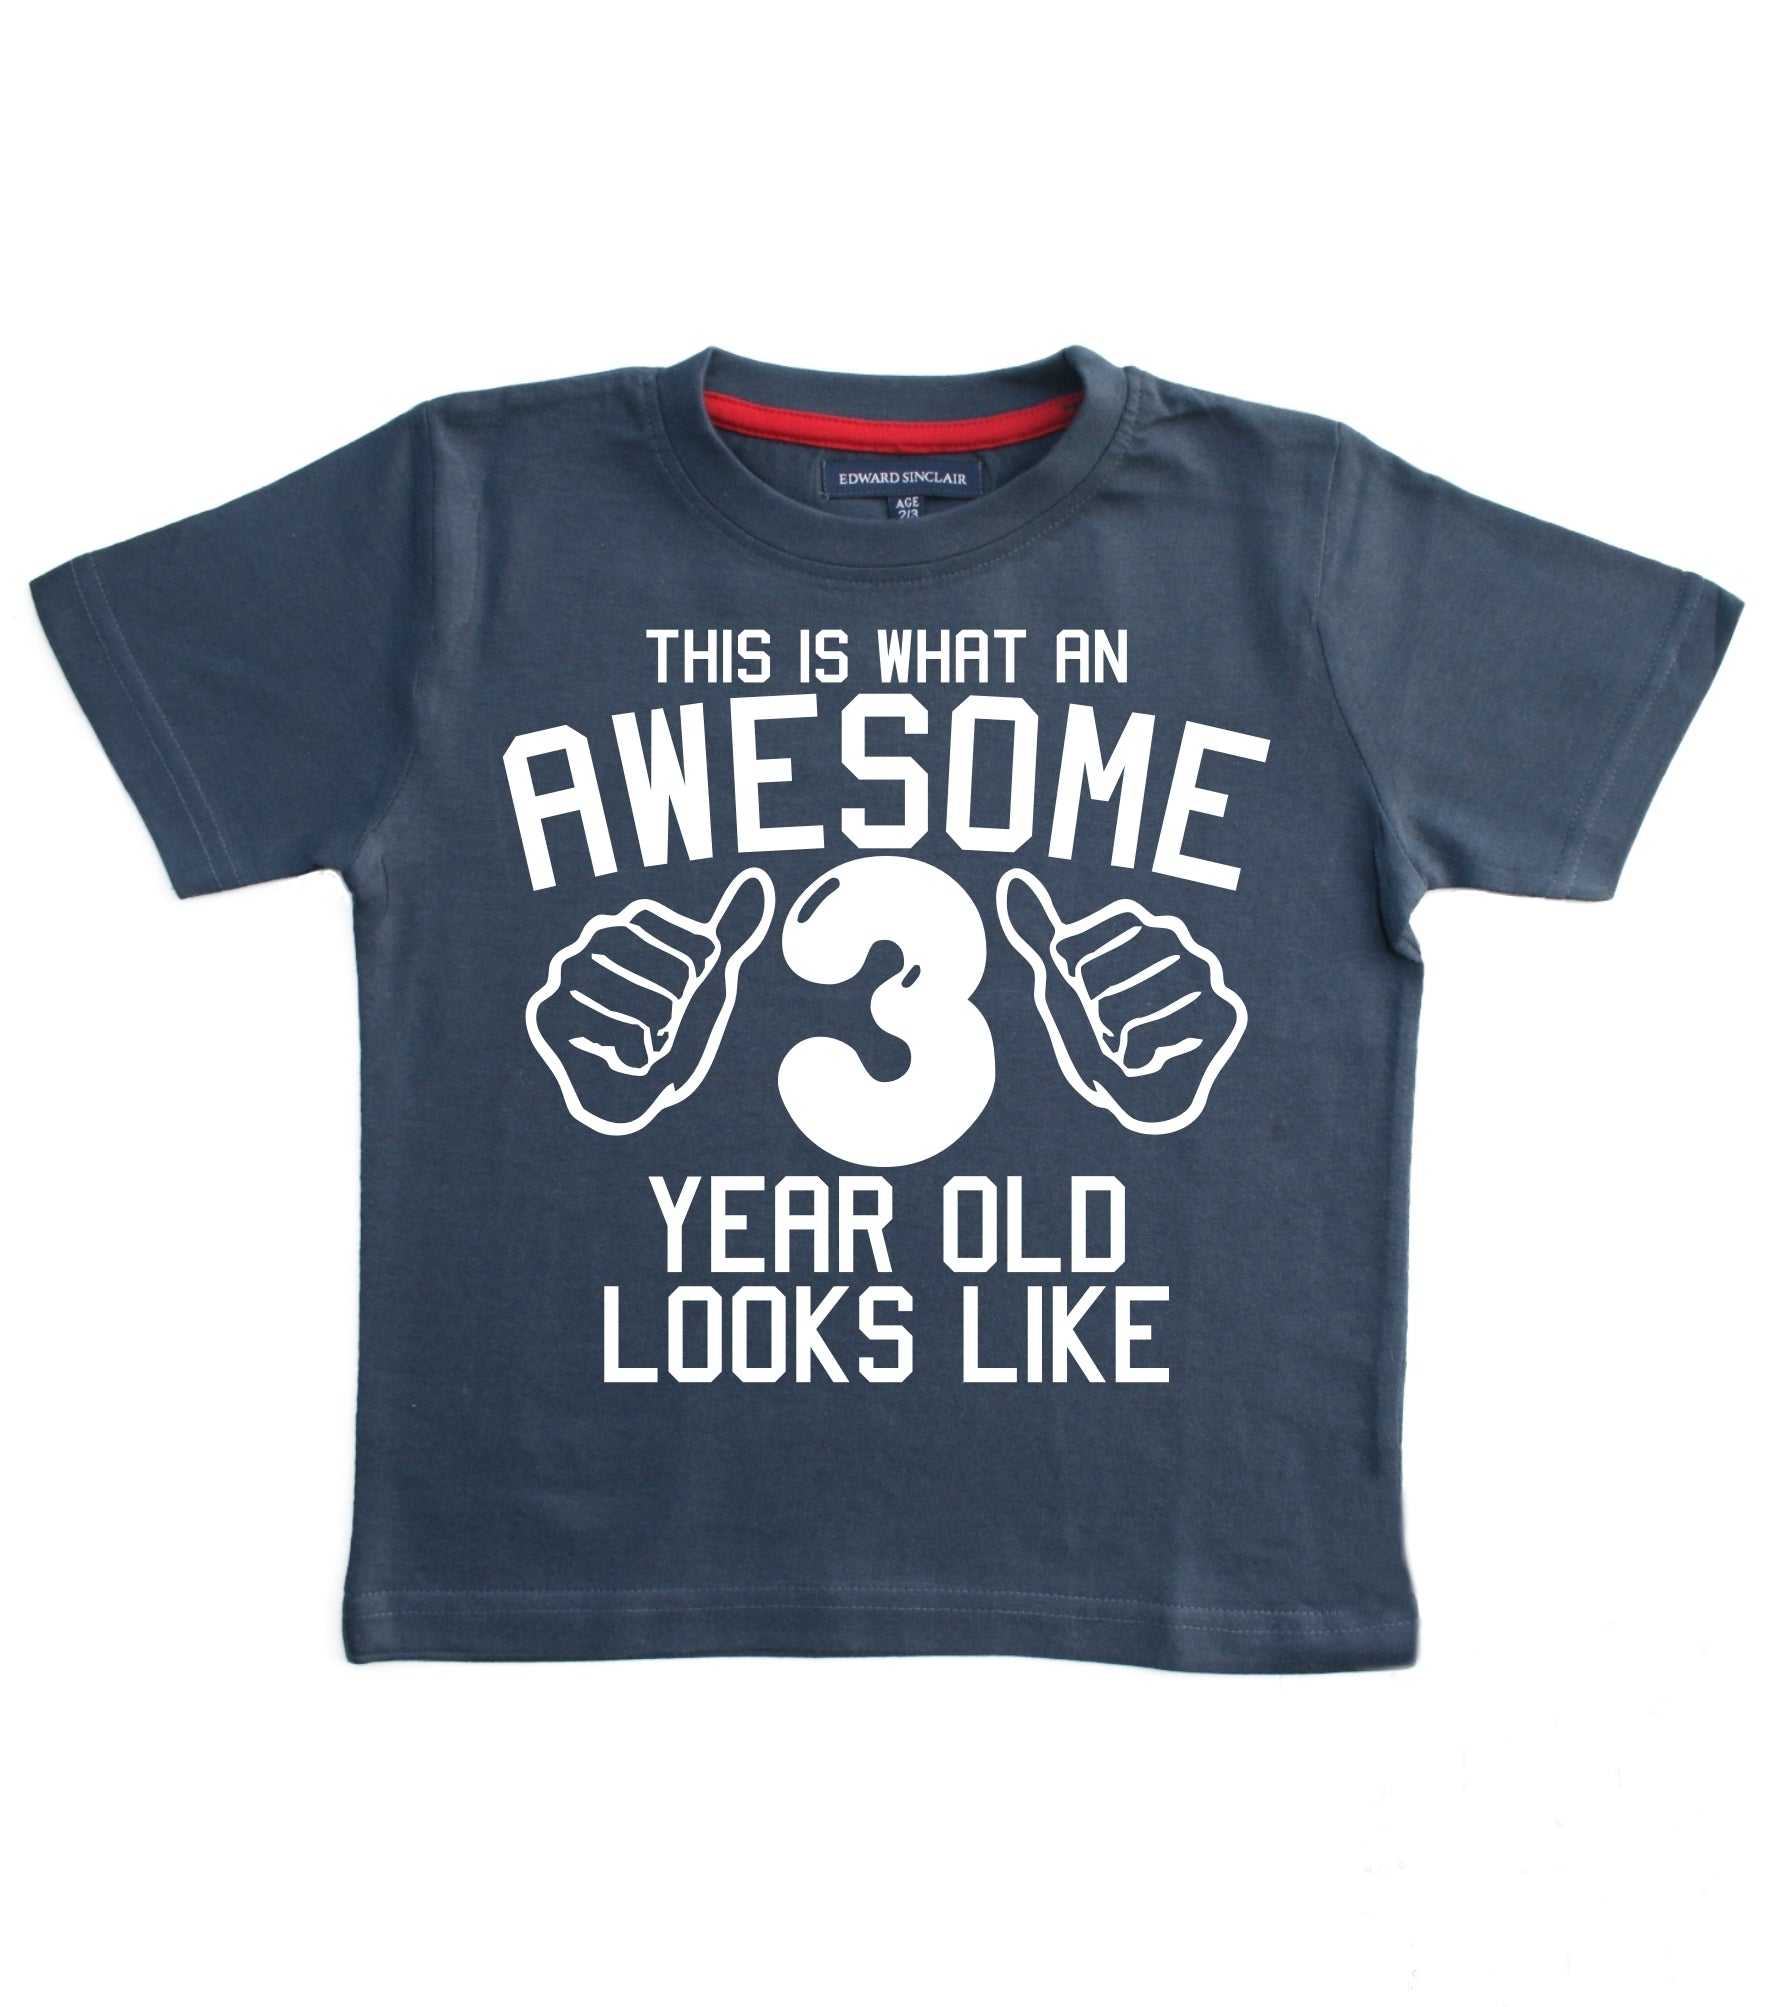 T-shirt pour enfant This What an Awesome 3 Year Old Looks Like 